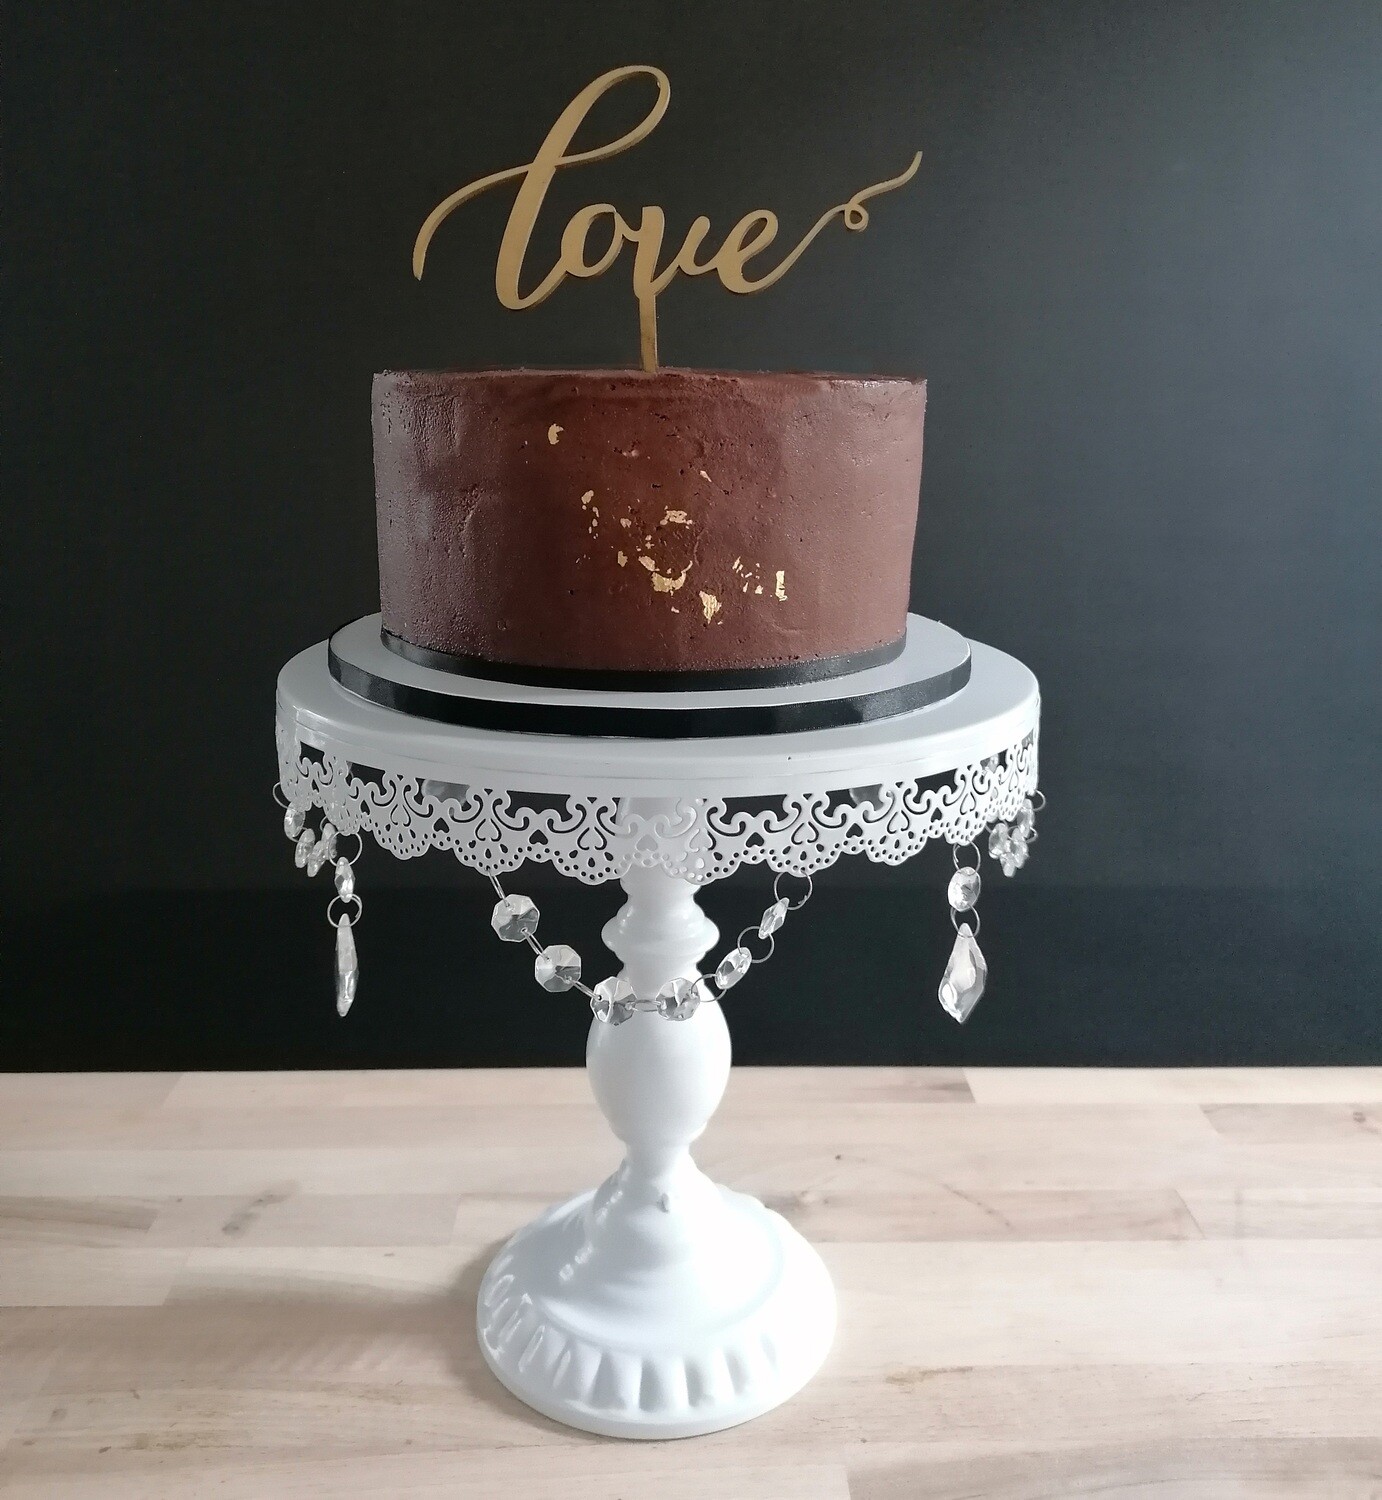 White Metal - Vintage with Filigree Design -  Pedestal -1 Tier Cake Stand - Code GD0060S - SMALL SIZE - 7.5" ROUND X 6.5" TALL